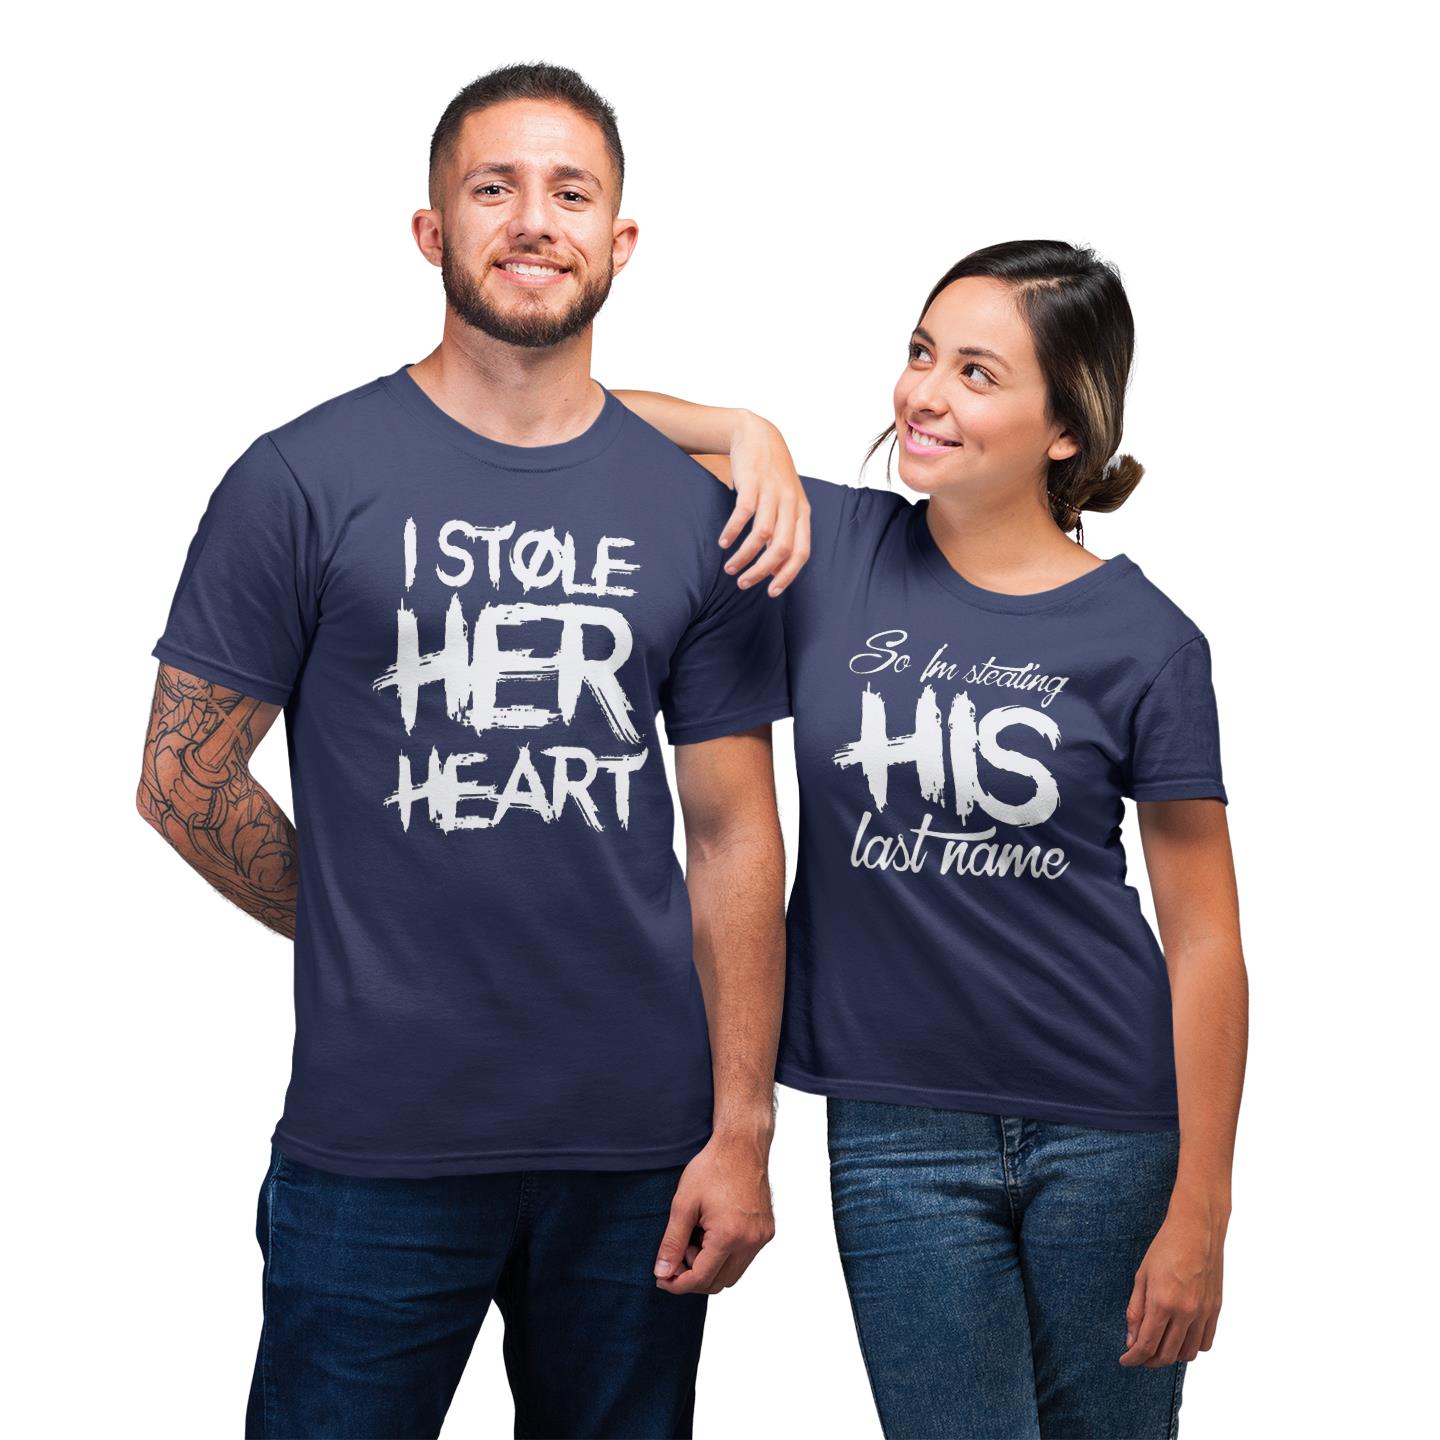 I Stole Her Heart Last Name  Couple Matching T-Shirt.